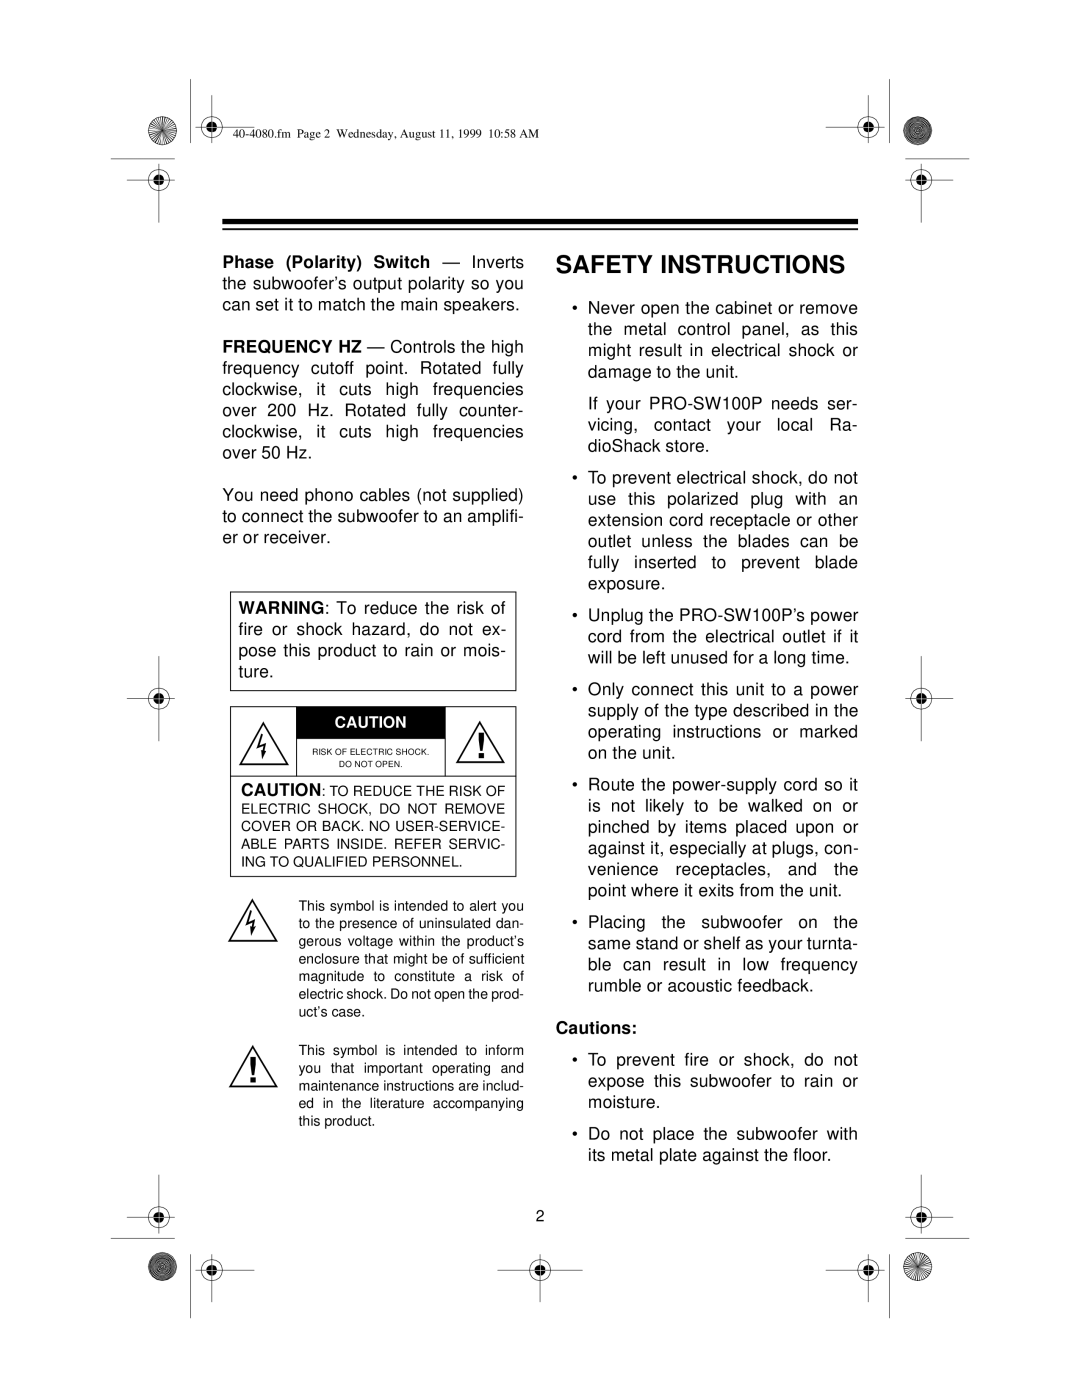 Optimus PRO-SW100P manual Safety Instructions, Cautions 